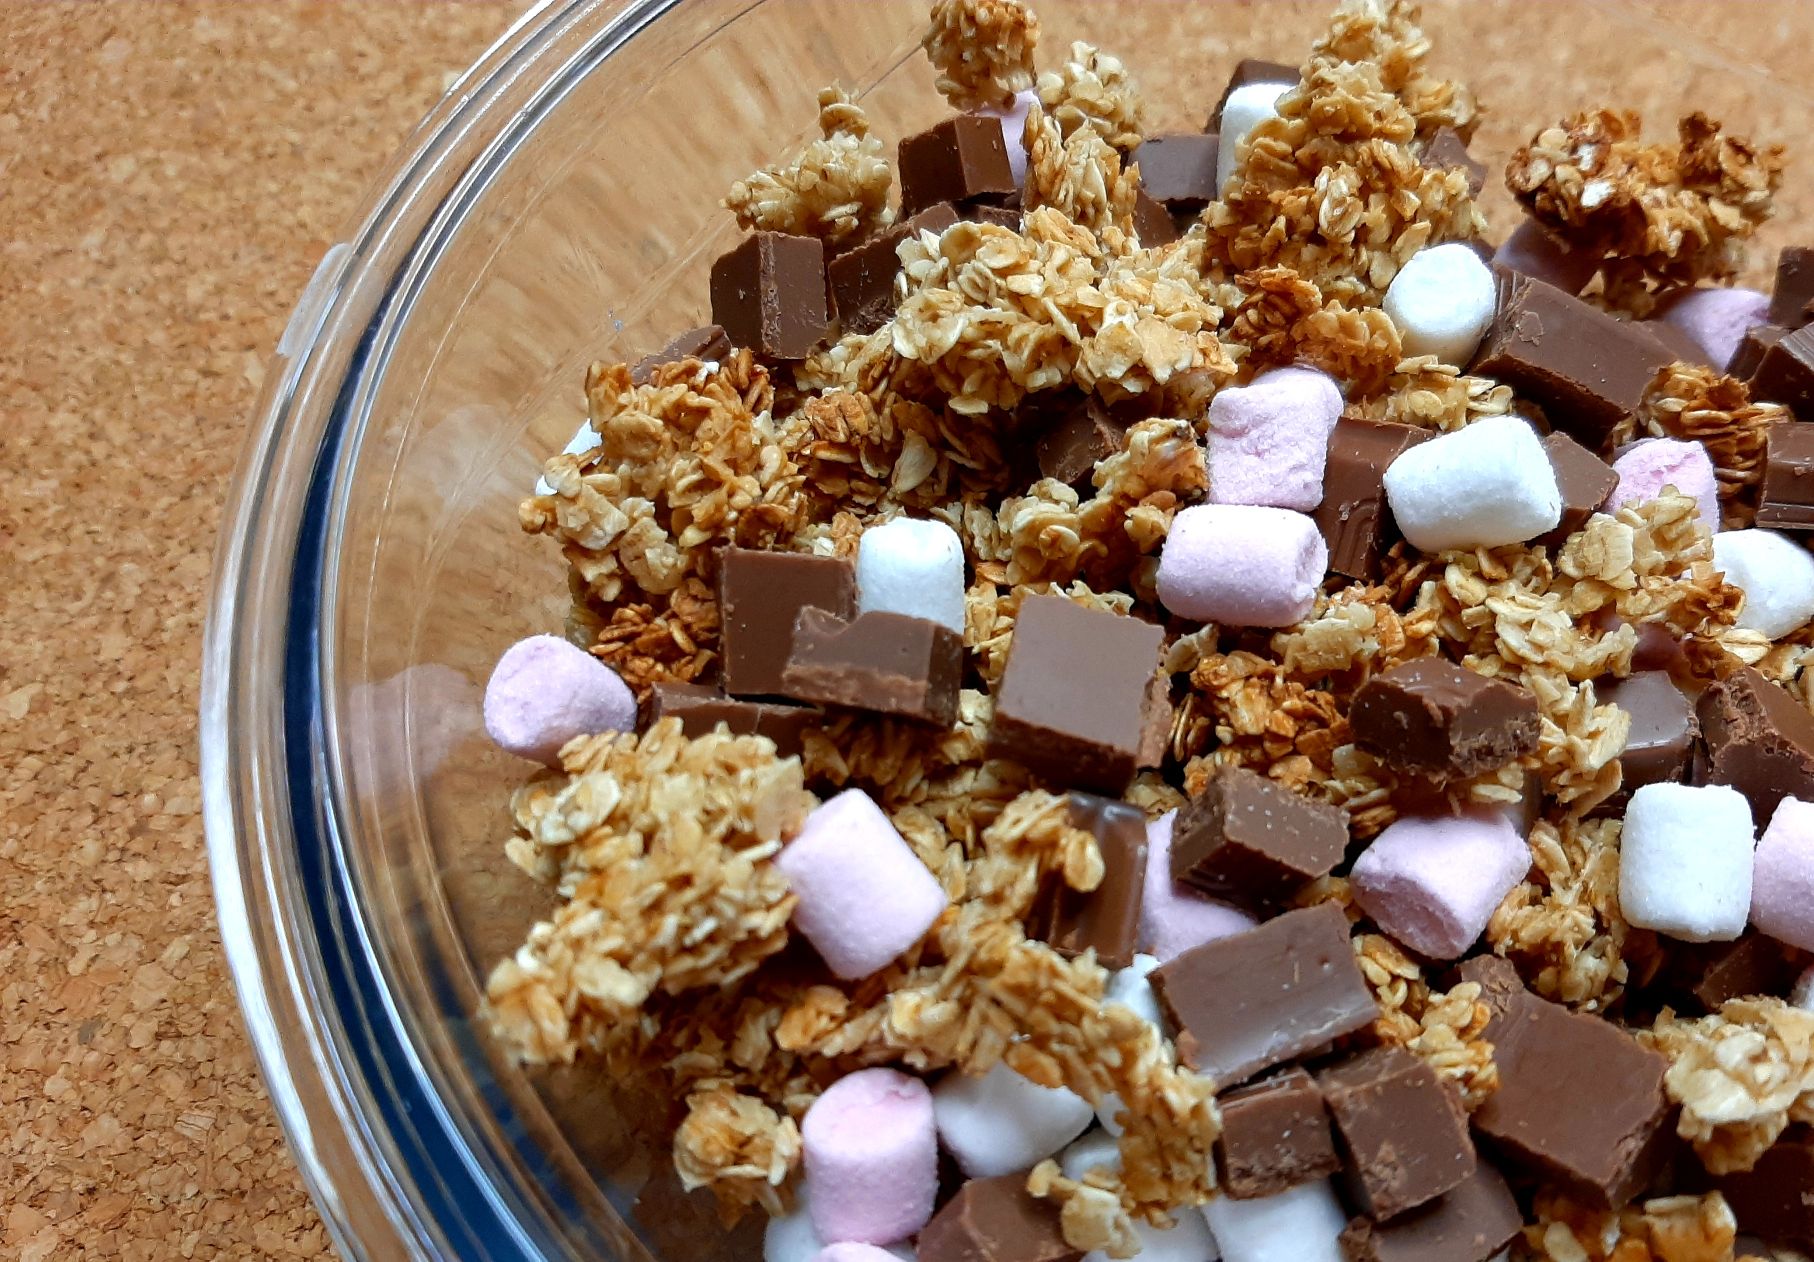 large granola pieces with chocolate chunks and mini marshmallows, in a glass bowl on a wooden surface